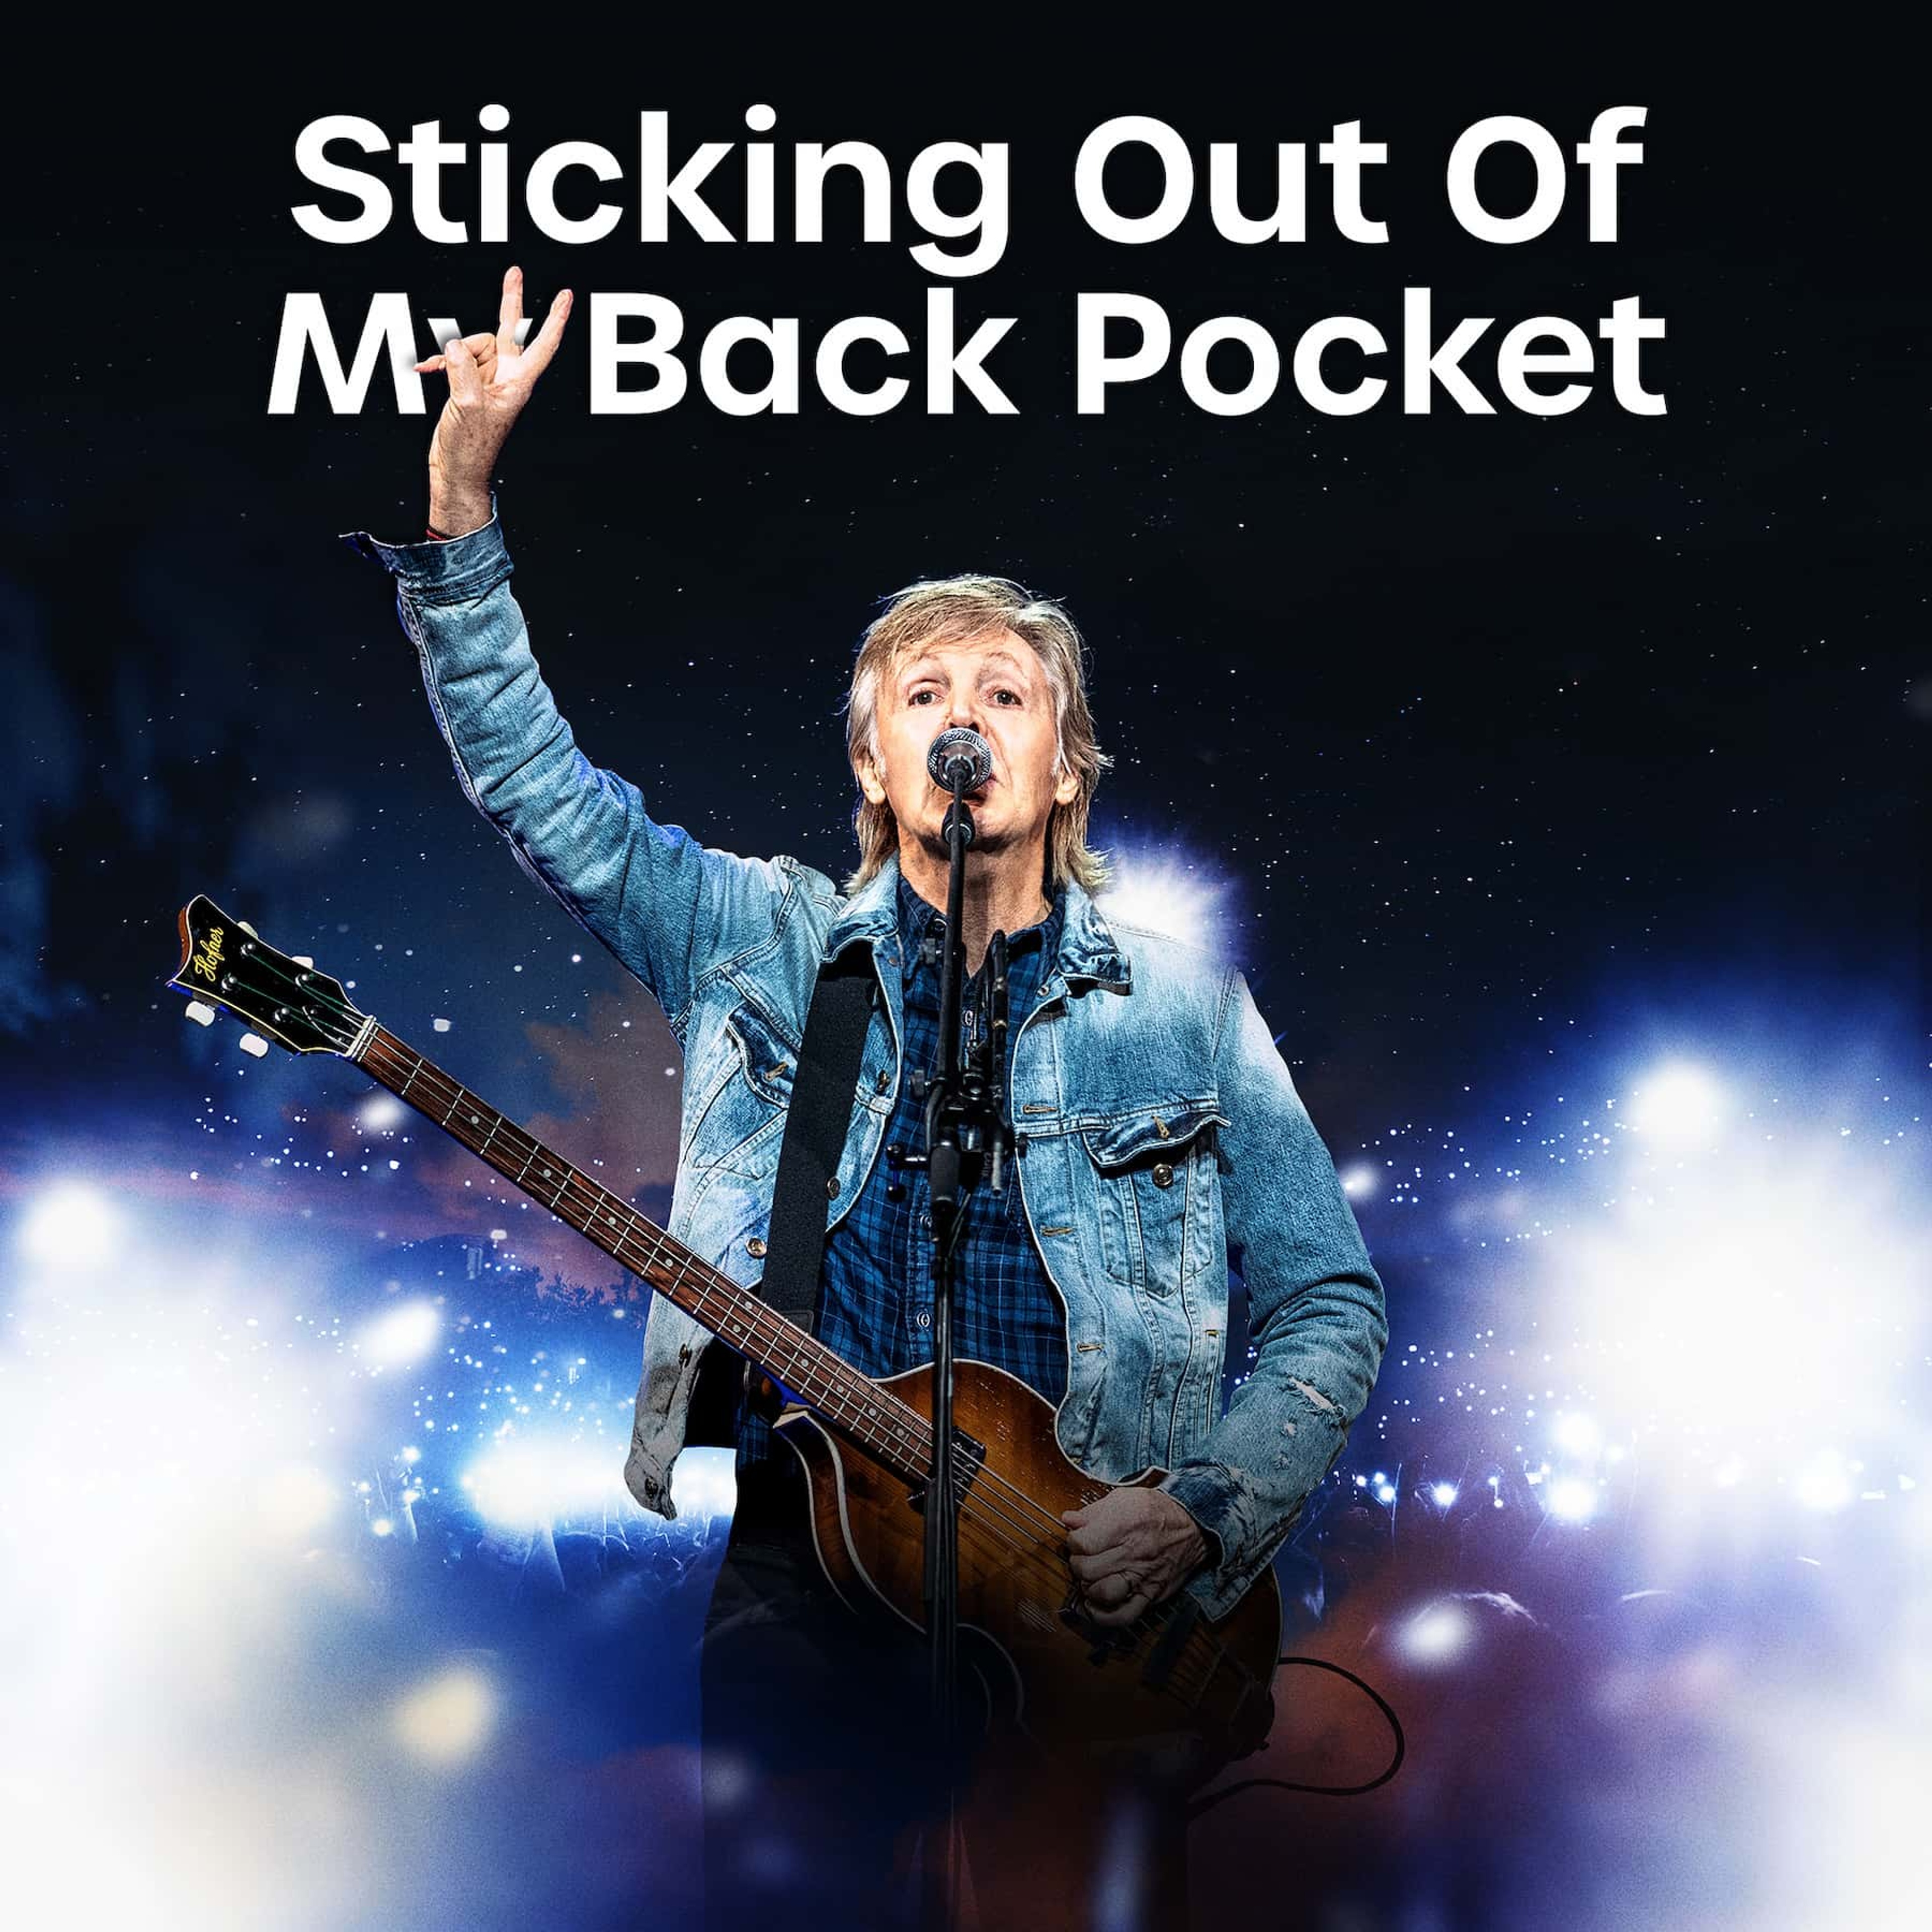 Graphic of Paul used for the July 2022 edition of 'Sticking Out Of My Back Pocket' playlist